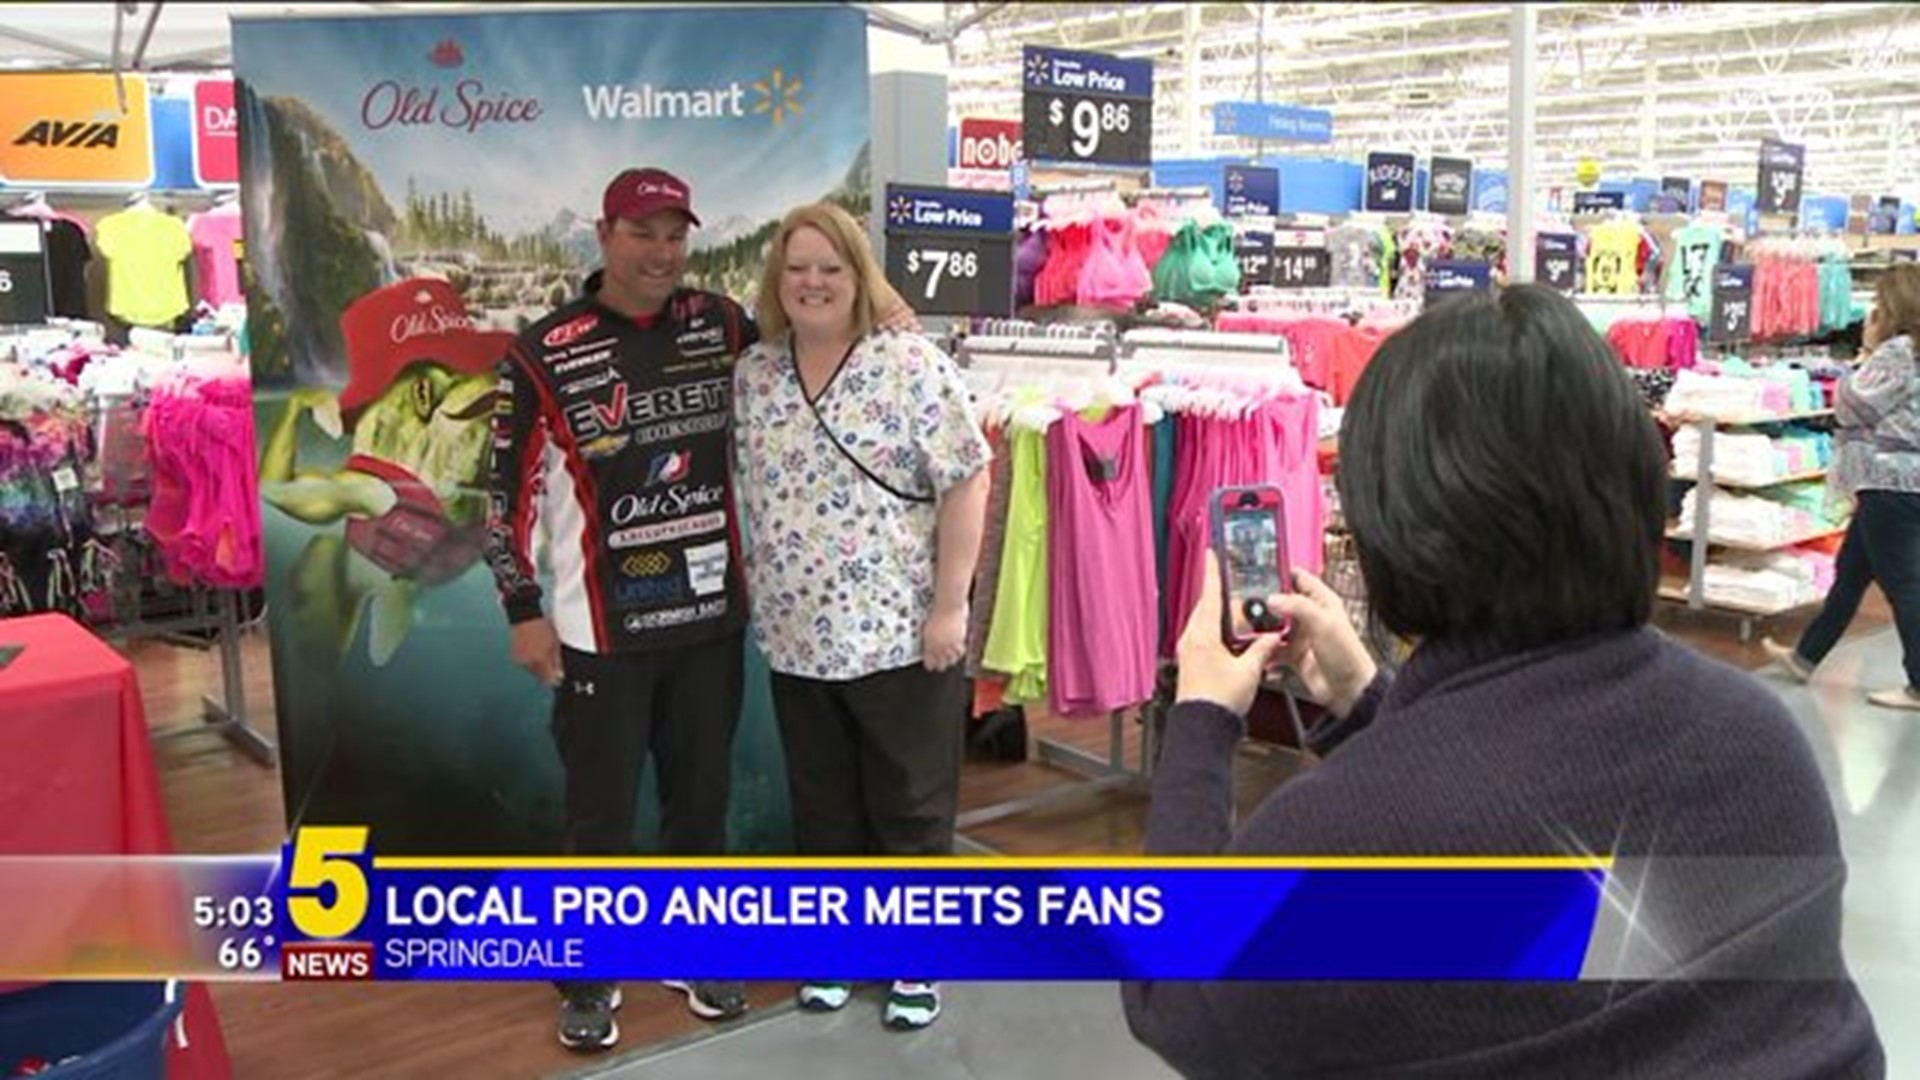 Local Pro Angler Meets Fans